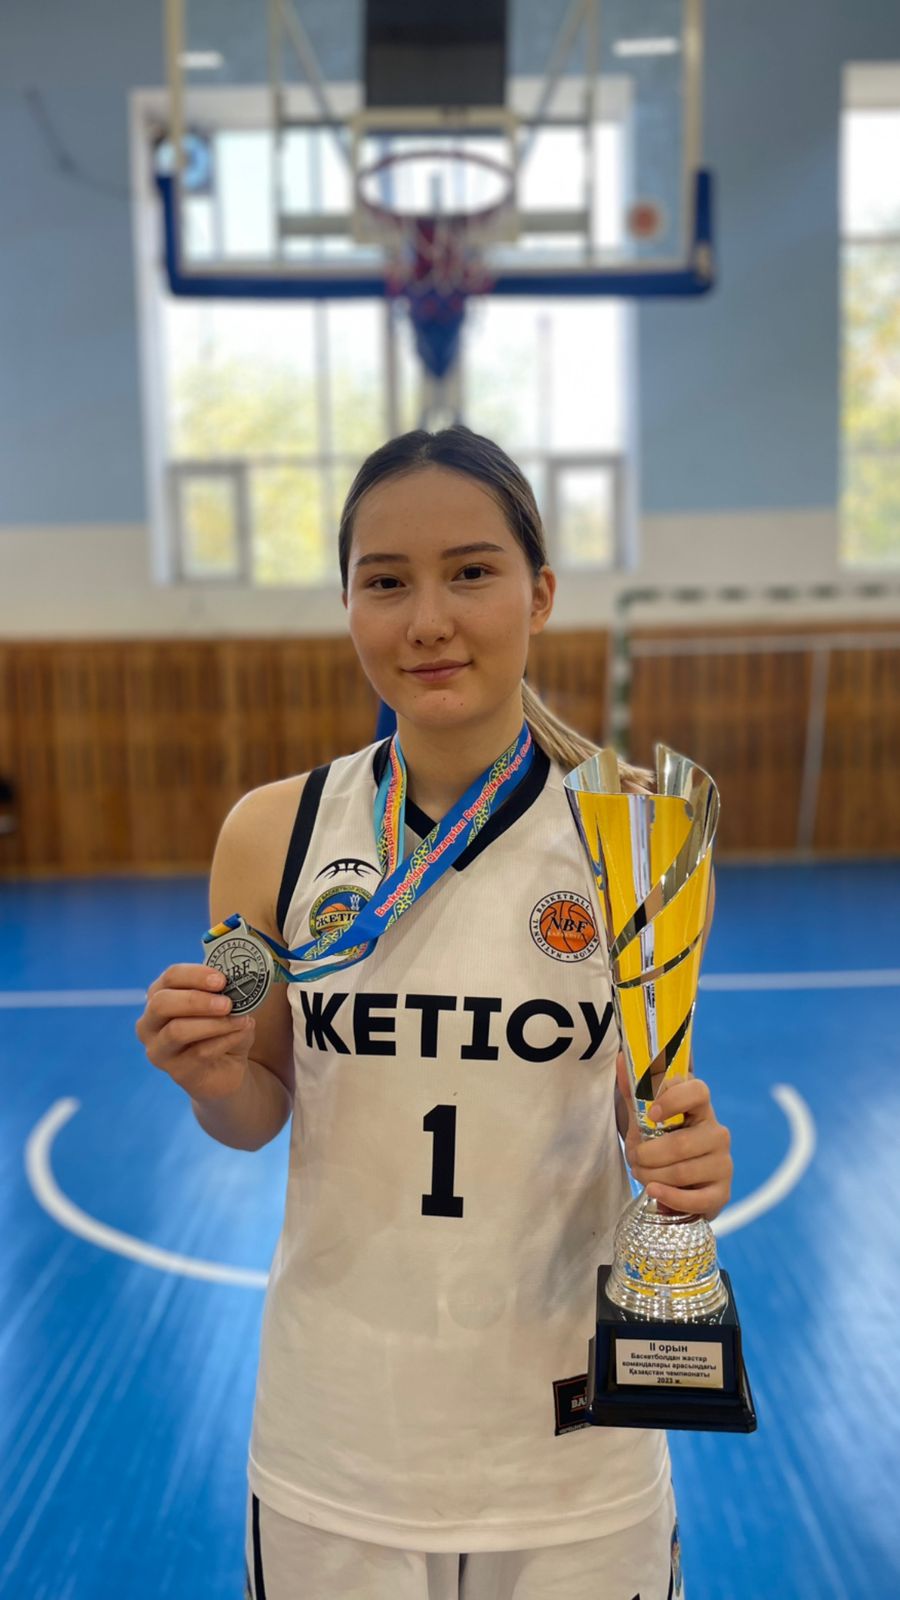 Faculty of the Department of Physical Education and Sports of KazNU congratulates L. Tursynova on this achievement!